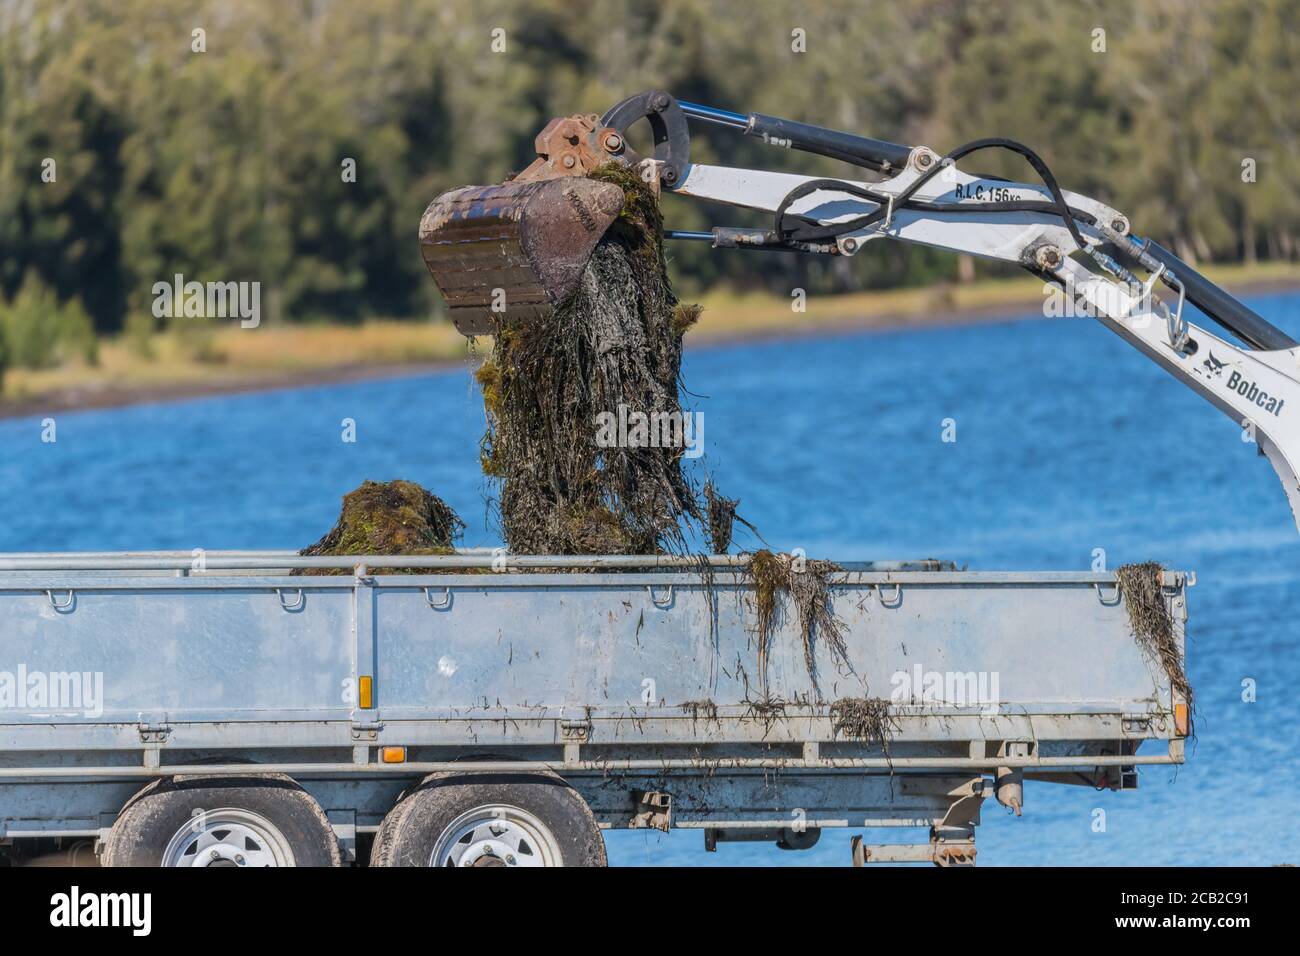 Seaweed harvesting and clean up on Lake Tuggerah at the Central Coast of NSW, Australia. Stock Photo